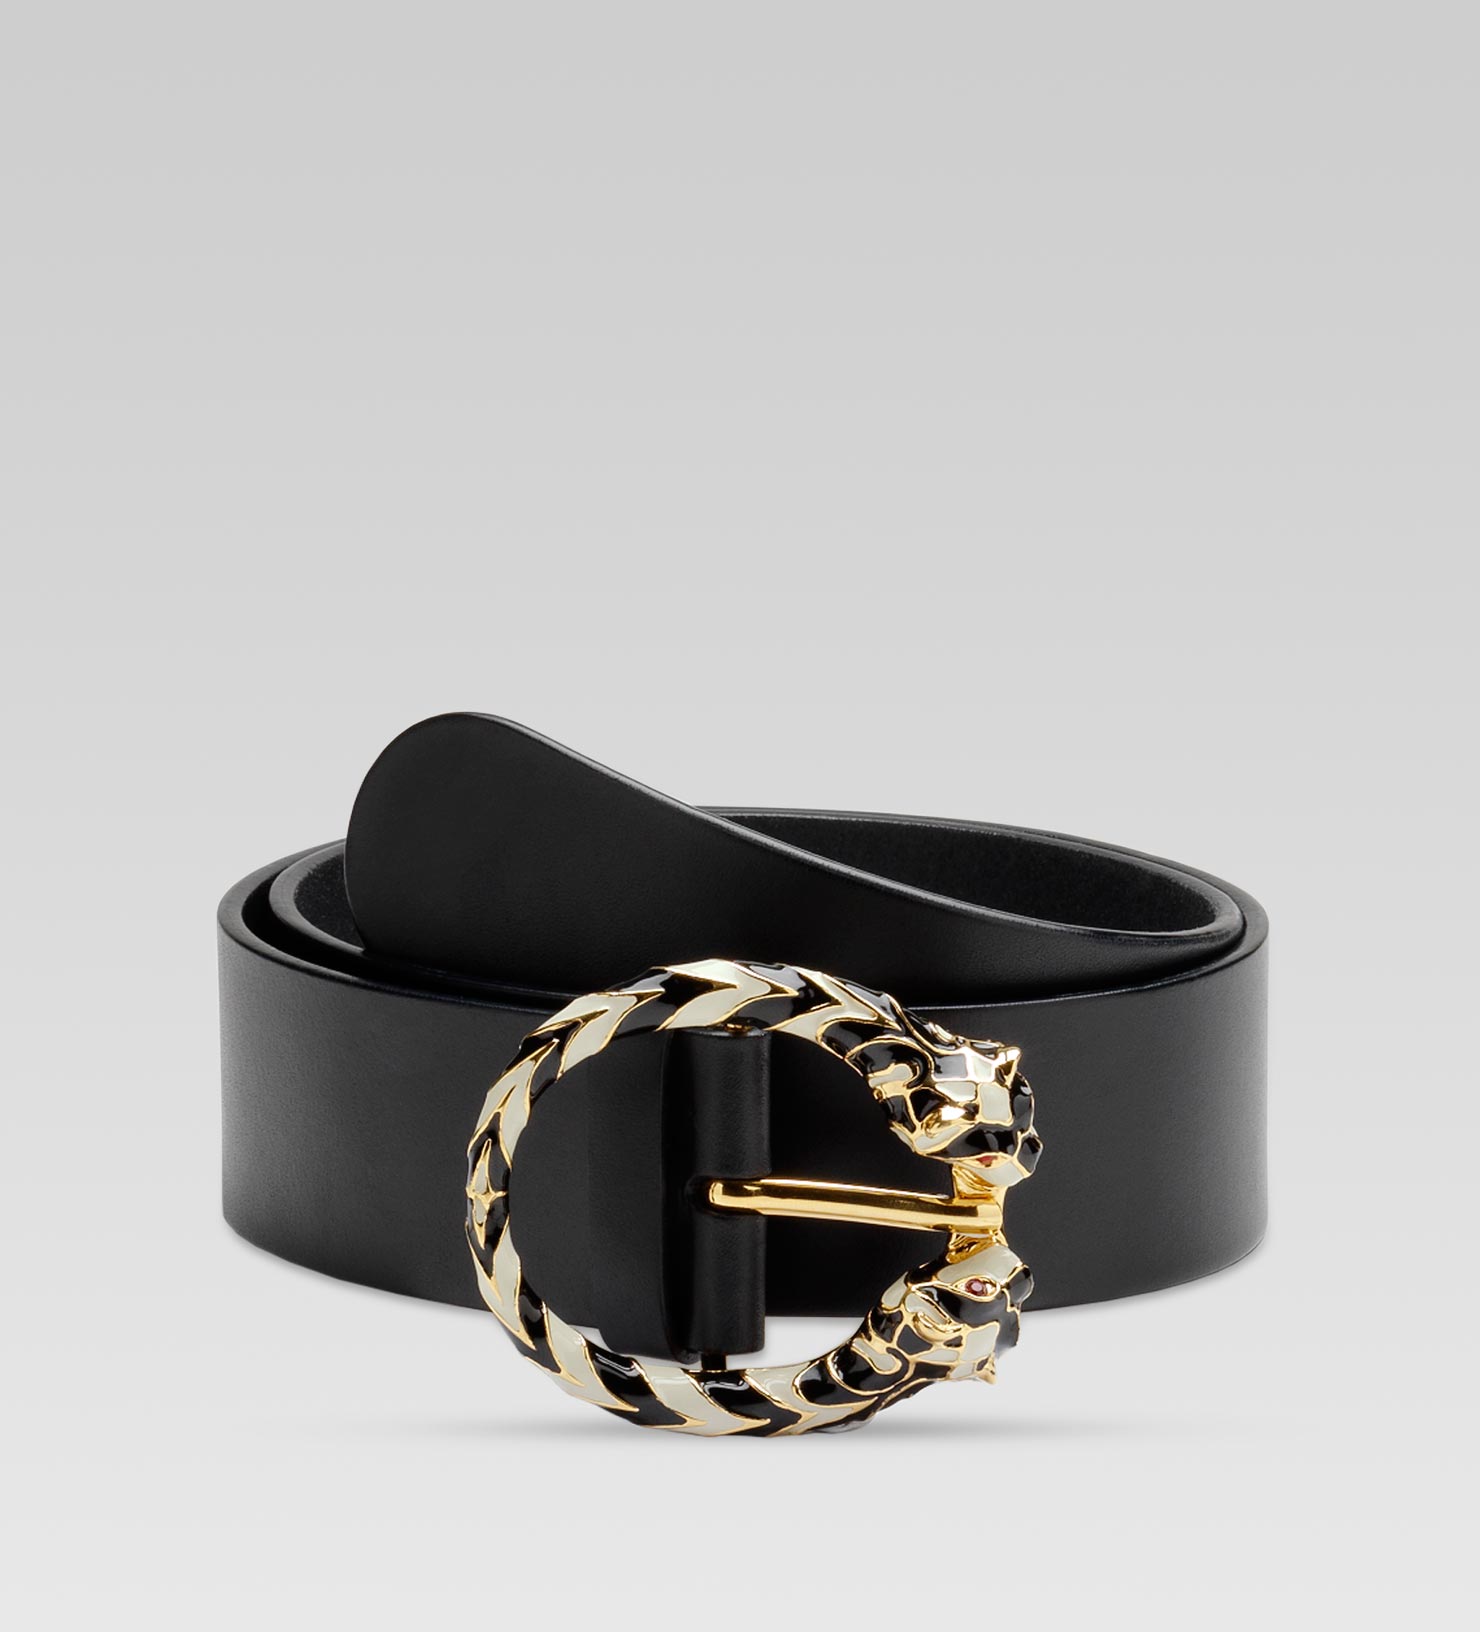 Lyst - Gucci Belt with Two Enameled Tiger Heads Buckle with Swarovski Details in Black